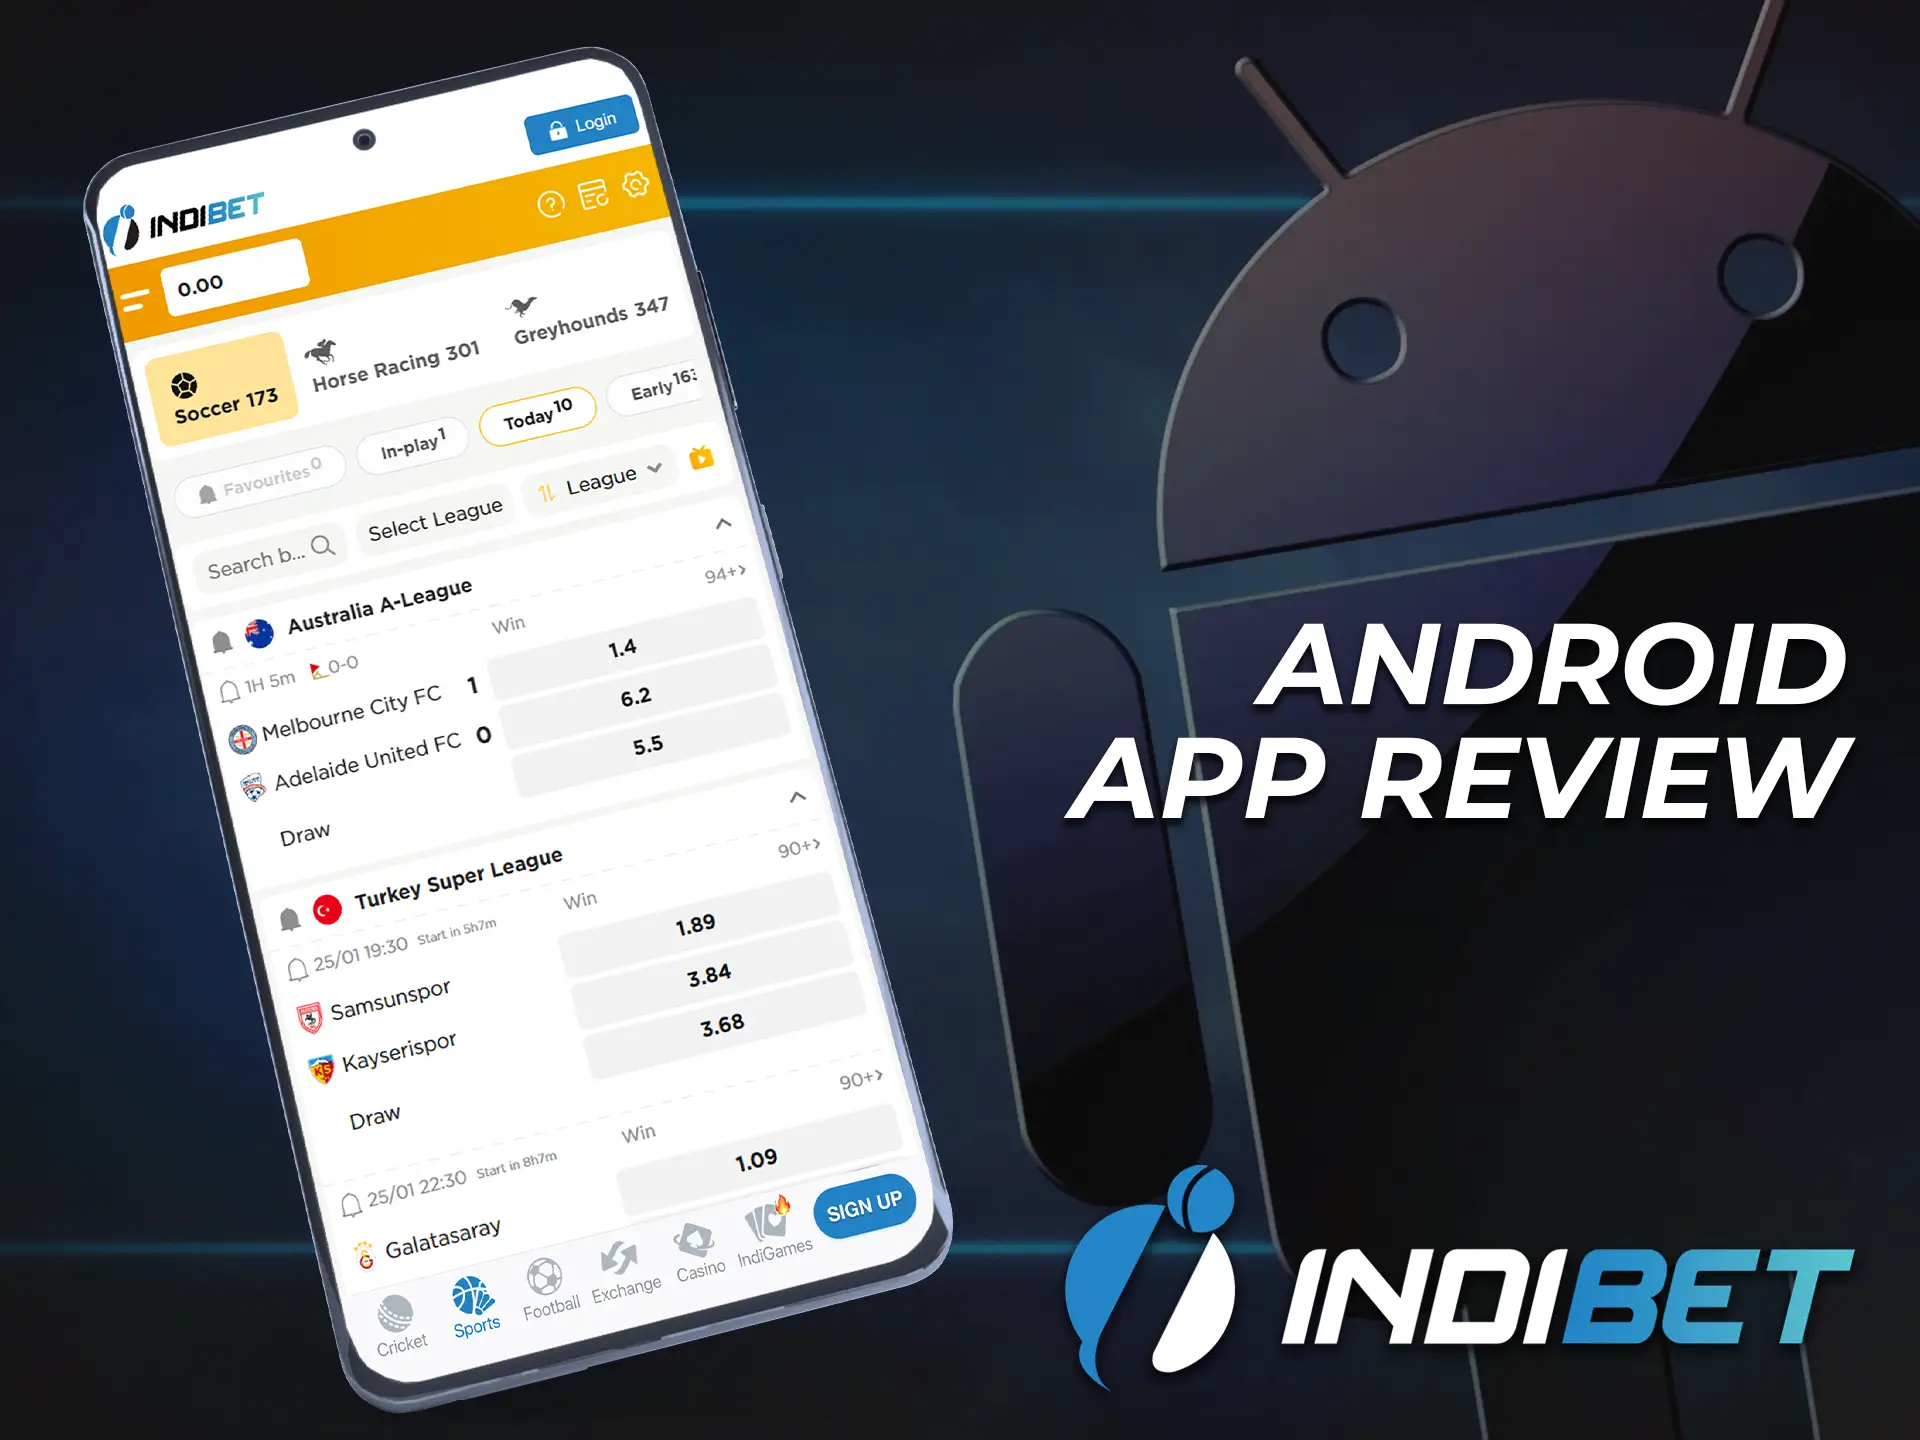 The system requirements of the Indibet app provide fast operation on Android devices.